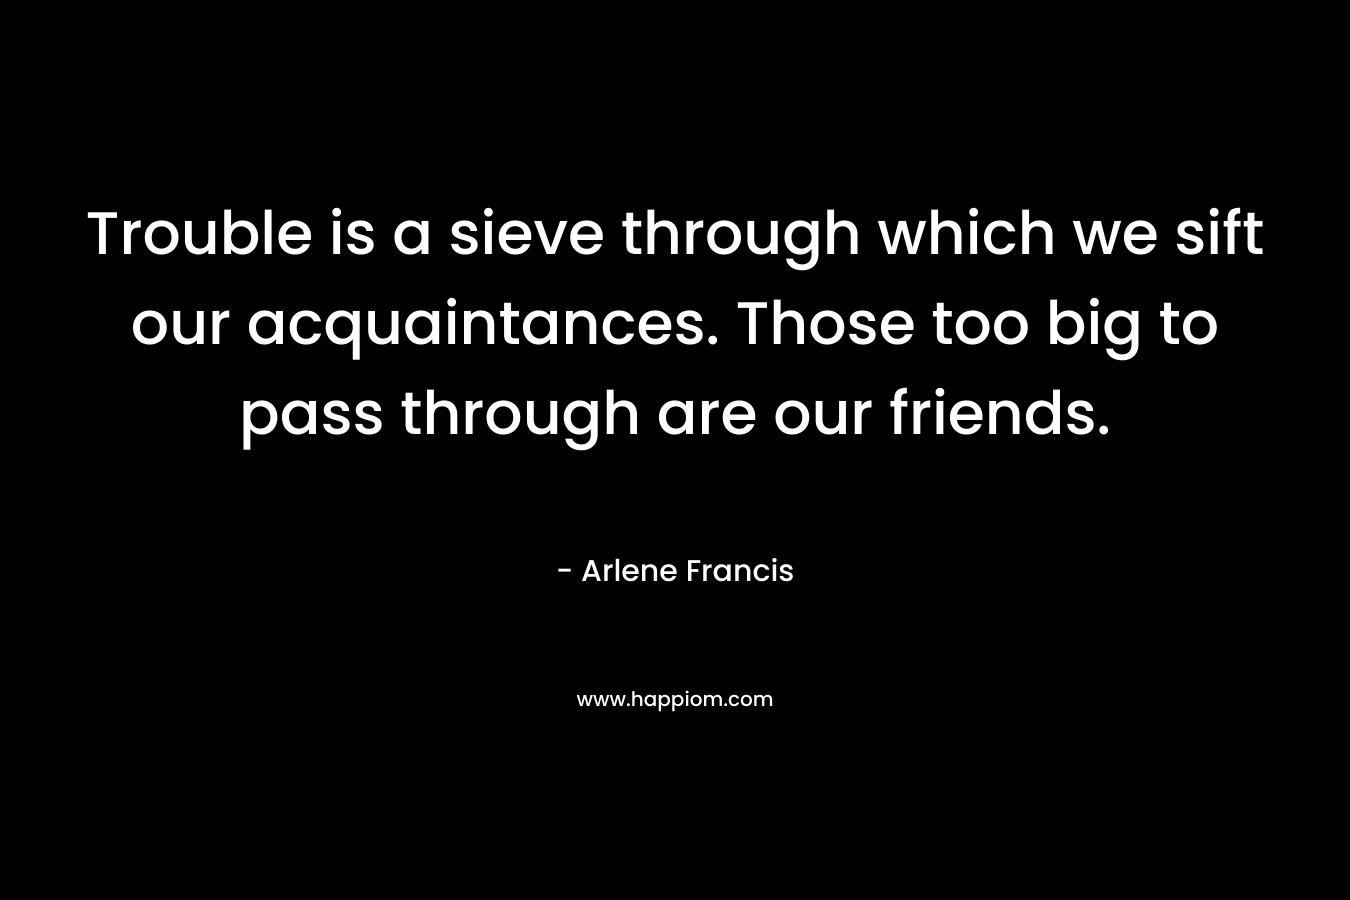 Trouble is a sieve through which we sift our acquaintances. Those too big to pass through are our friends. – Arlene Francis